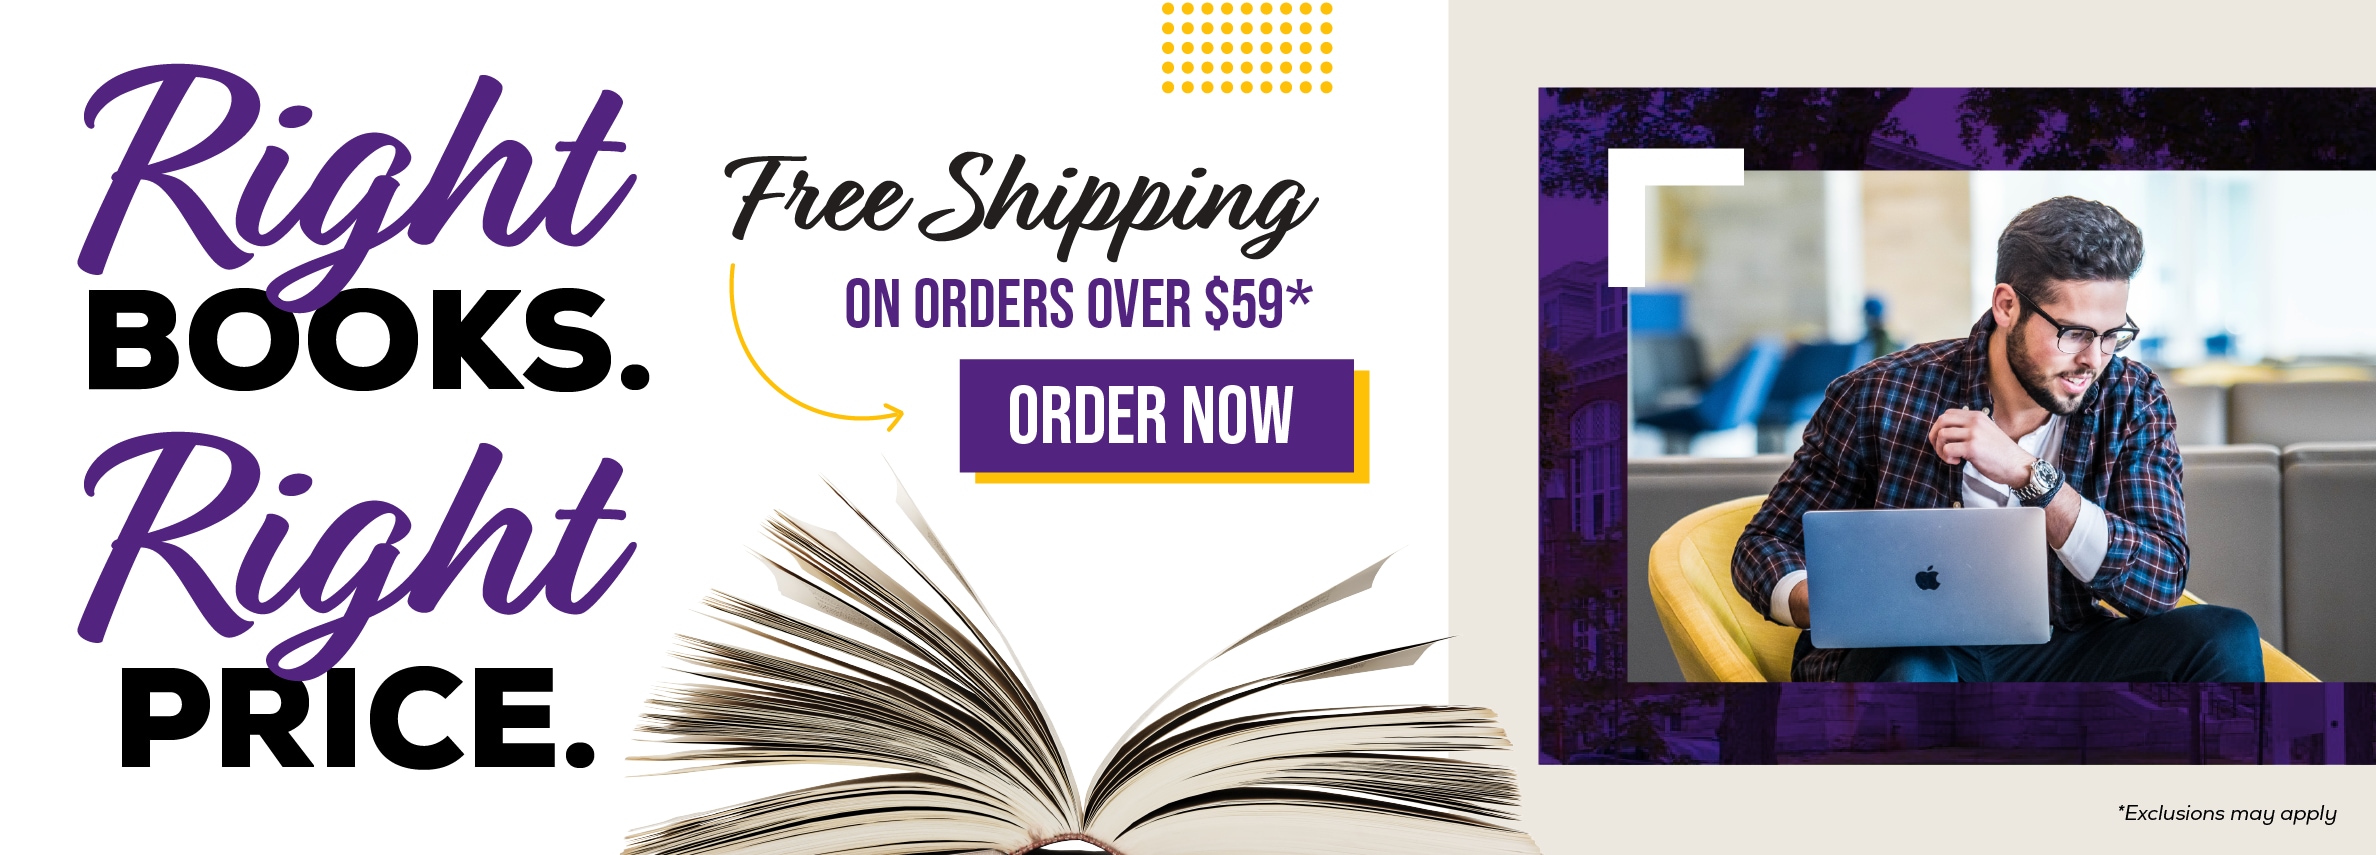 Right books. Right price. Free shipping on orders over $59.* Order now. *Exclusions may apply.